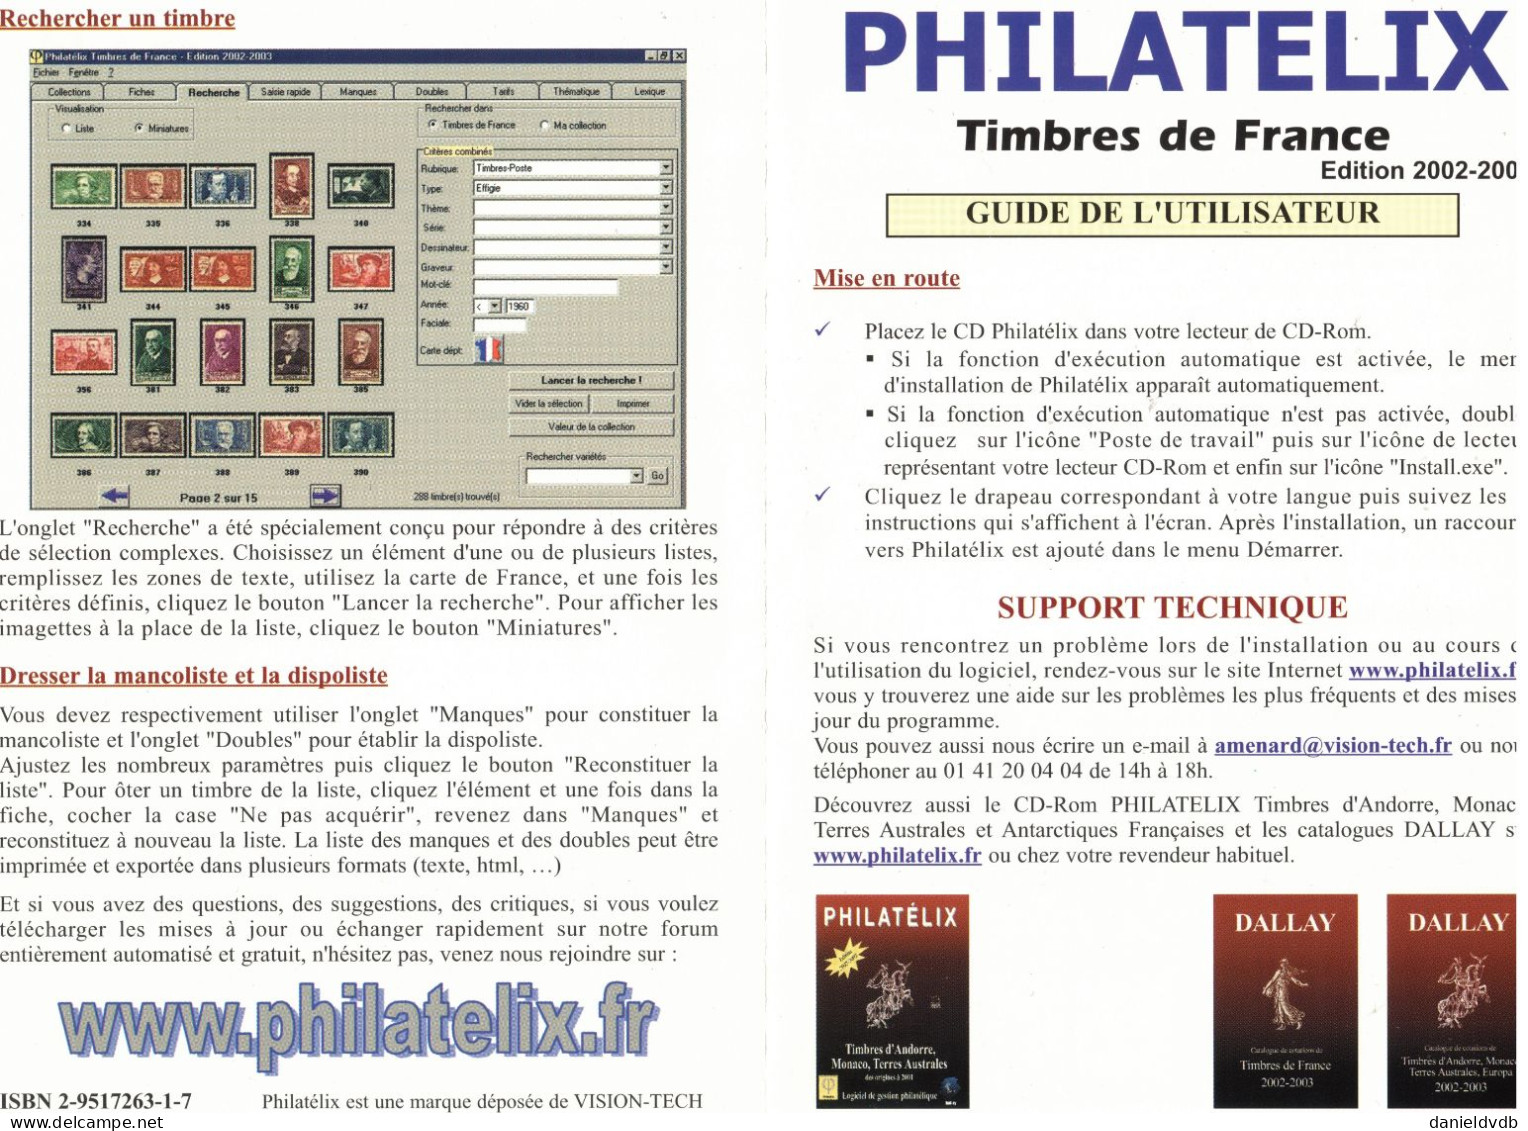 Timbres De FRANCE 1849 - 2001 Philatelix édition Dallay 2002-2003 1 CD-ROM - French